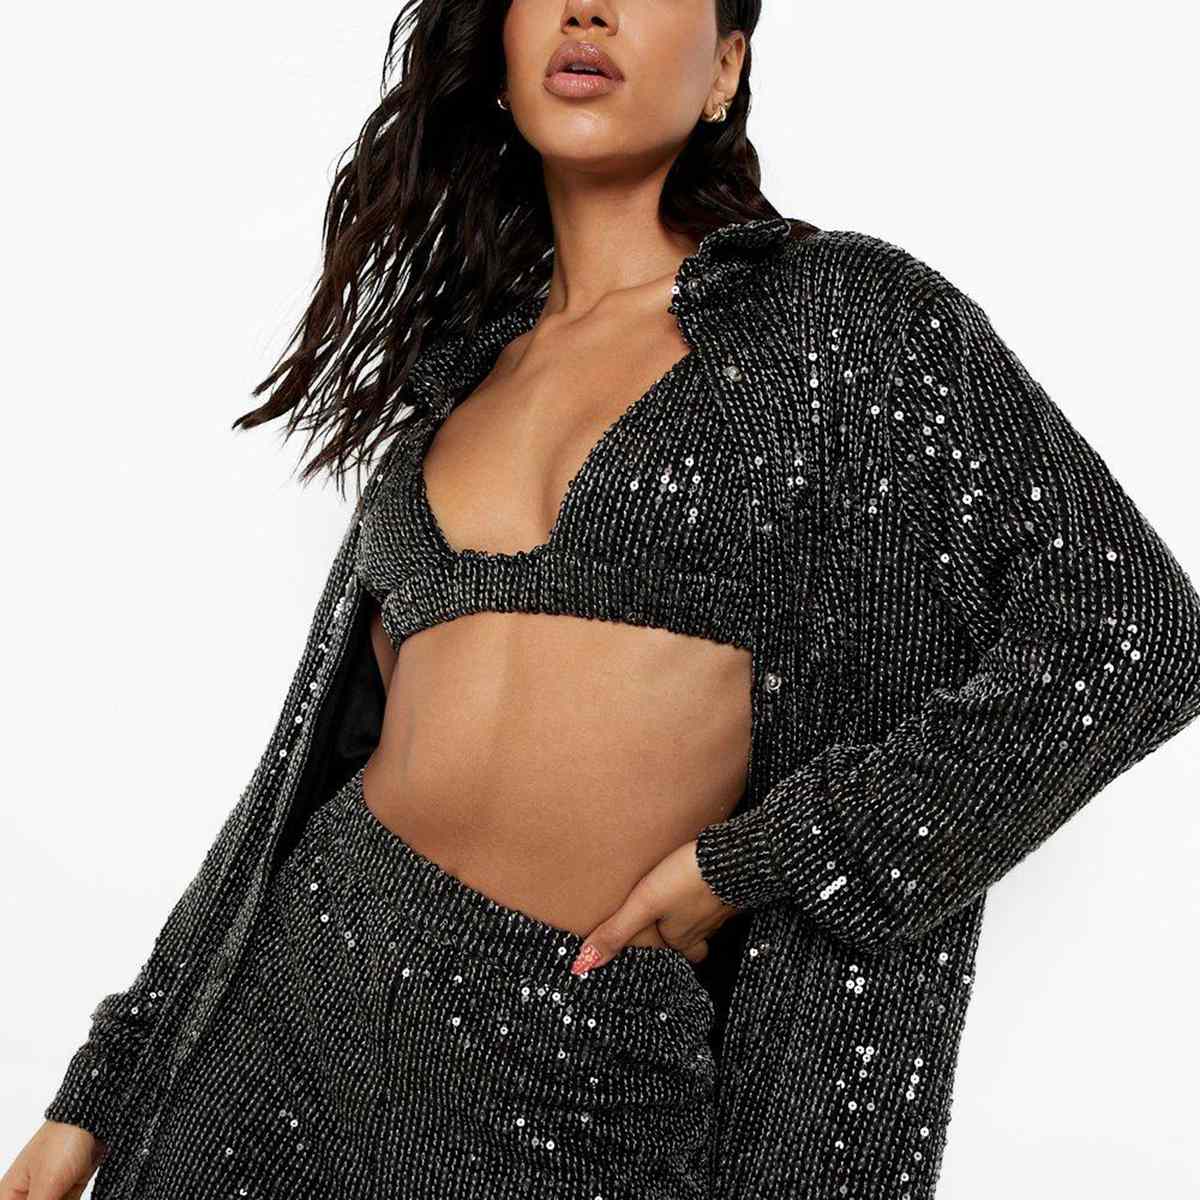 Boohoo holiday party outfits/sitewide sale